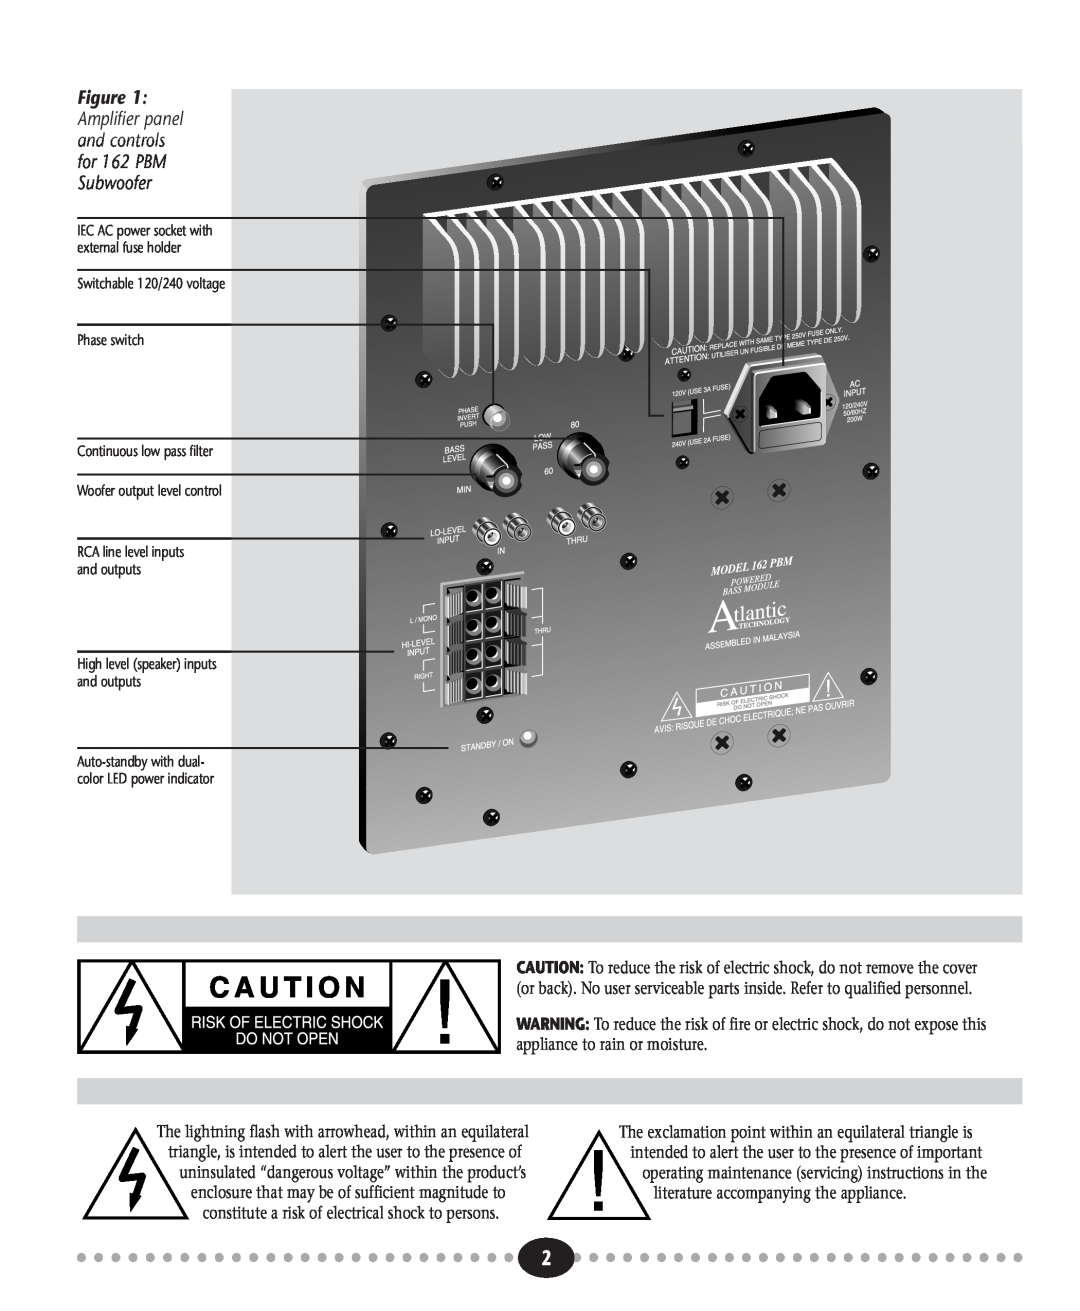 Atlantic Technology 162 PBM instruction manual Switchable 120/240 voltage Phase switch, Continuous low pass filter 